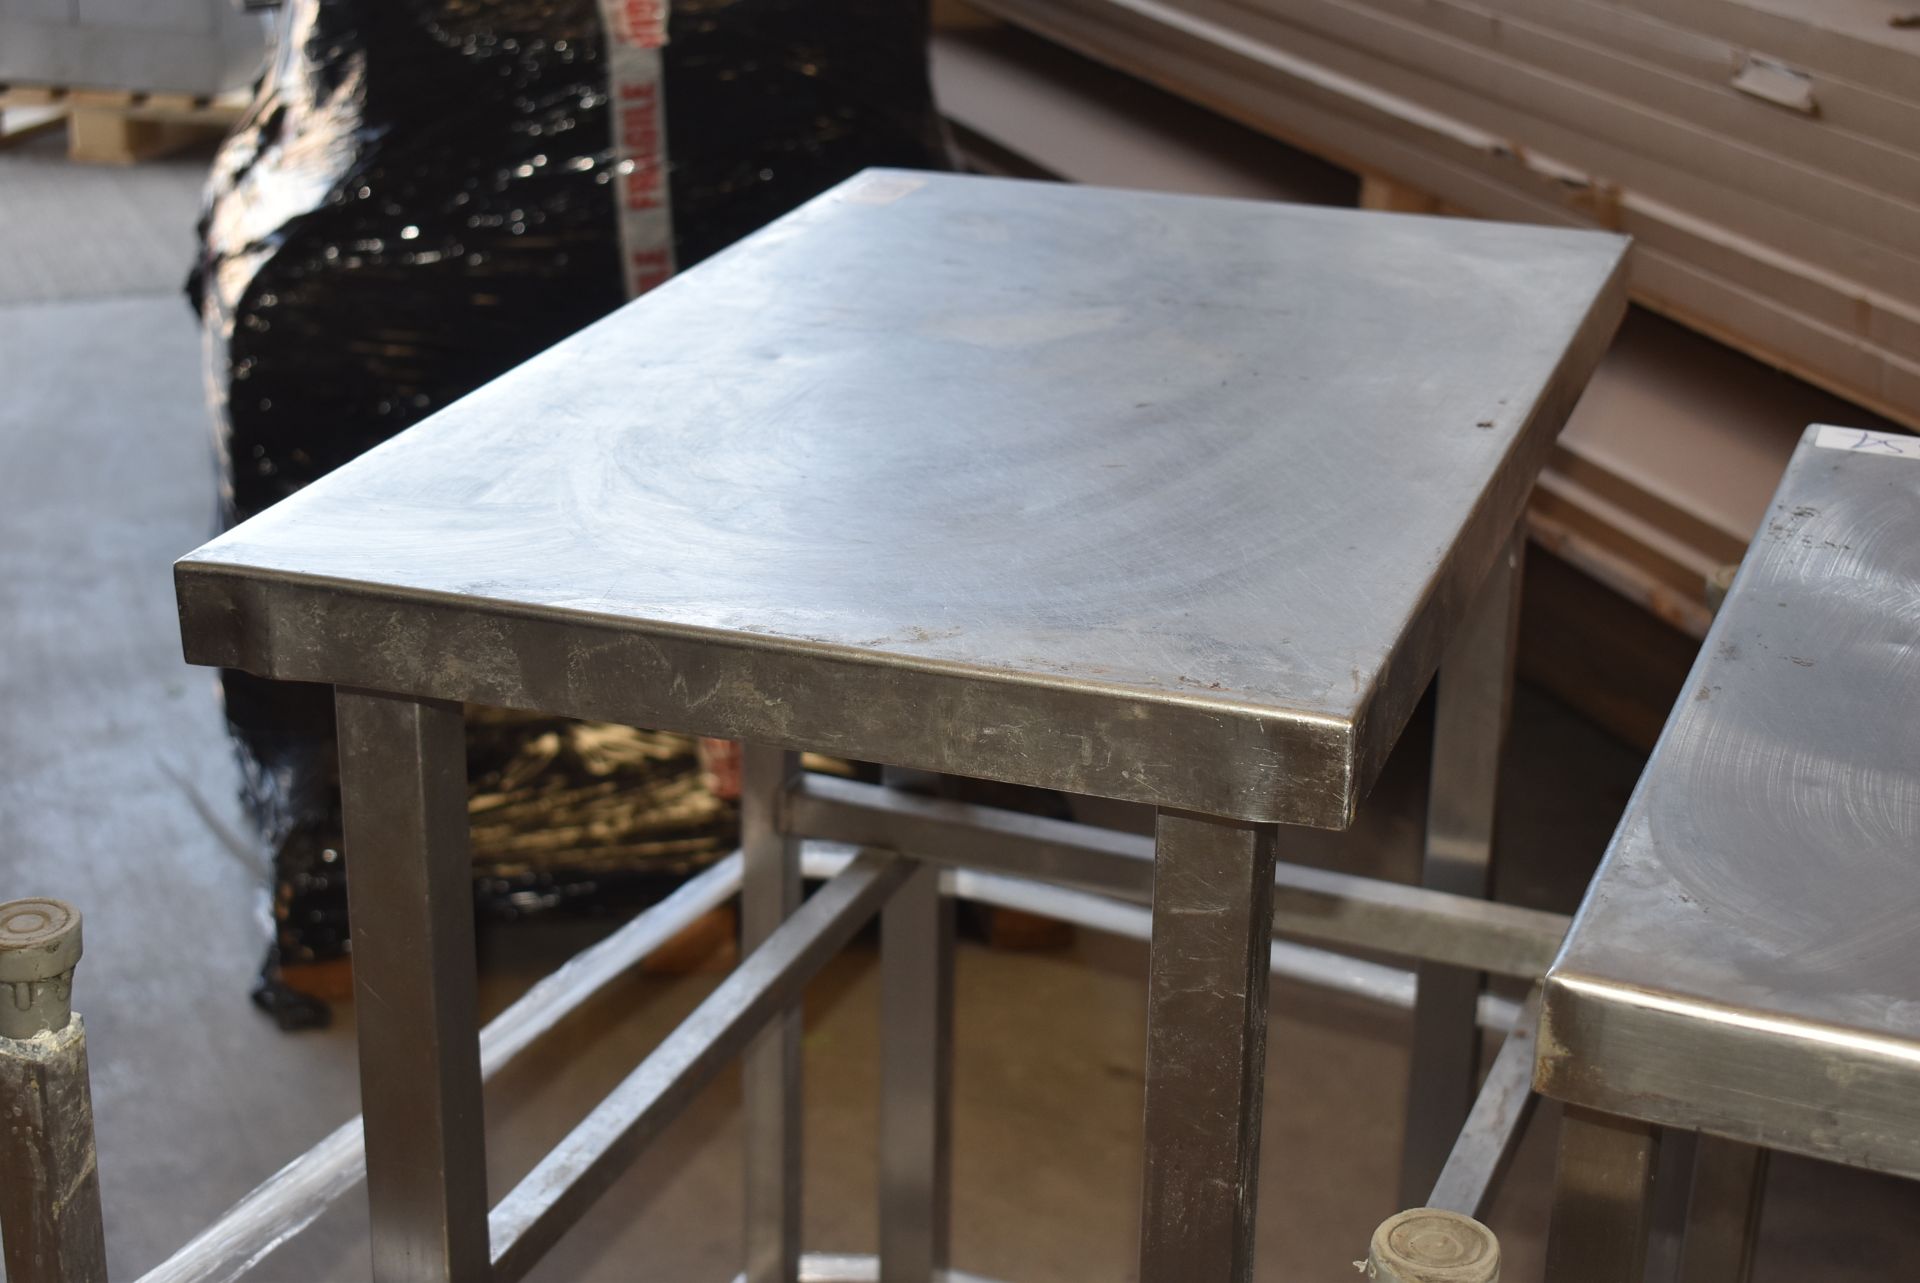 4 x Stainless Steel prep Tables - Sizes Include 46x76cm, 61x61cm and 96x36cm - CL282 - Ref LF272 A4D - Image 5 of 5